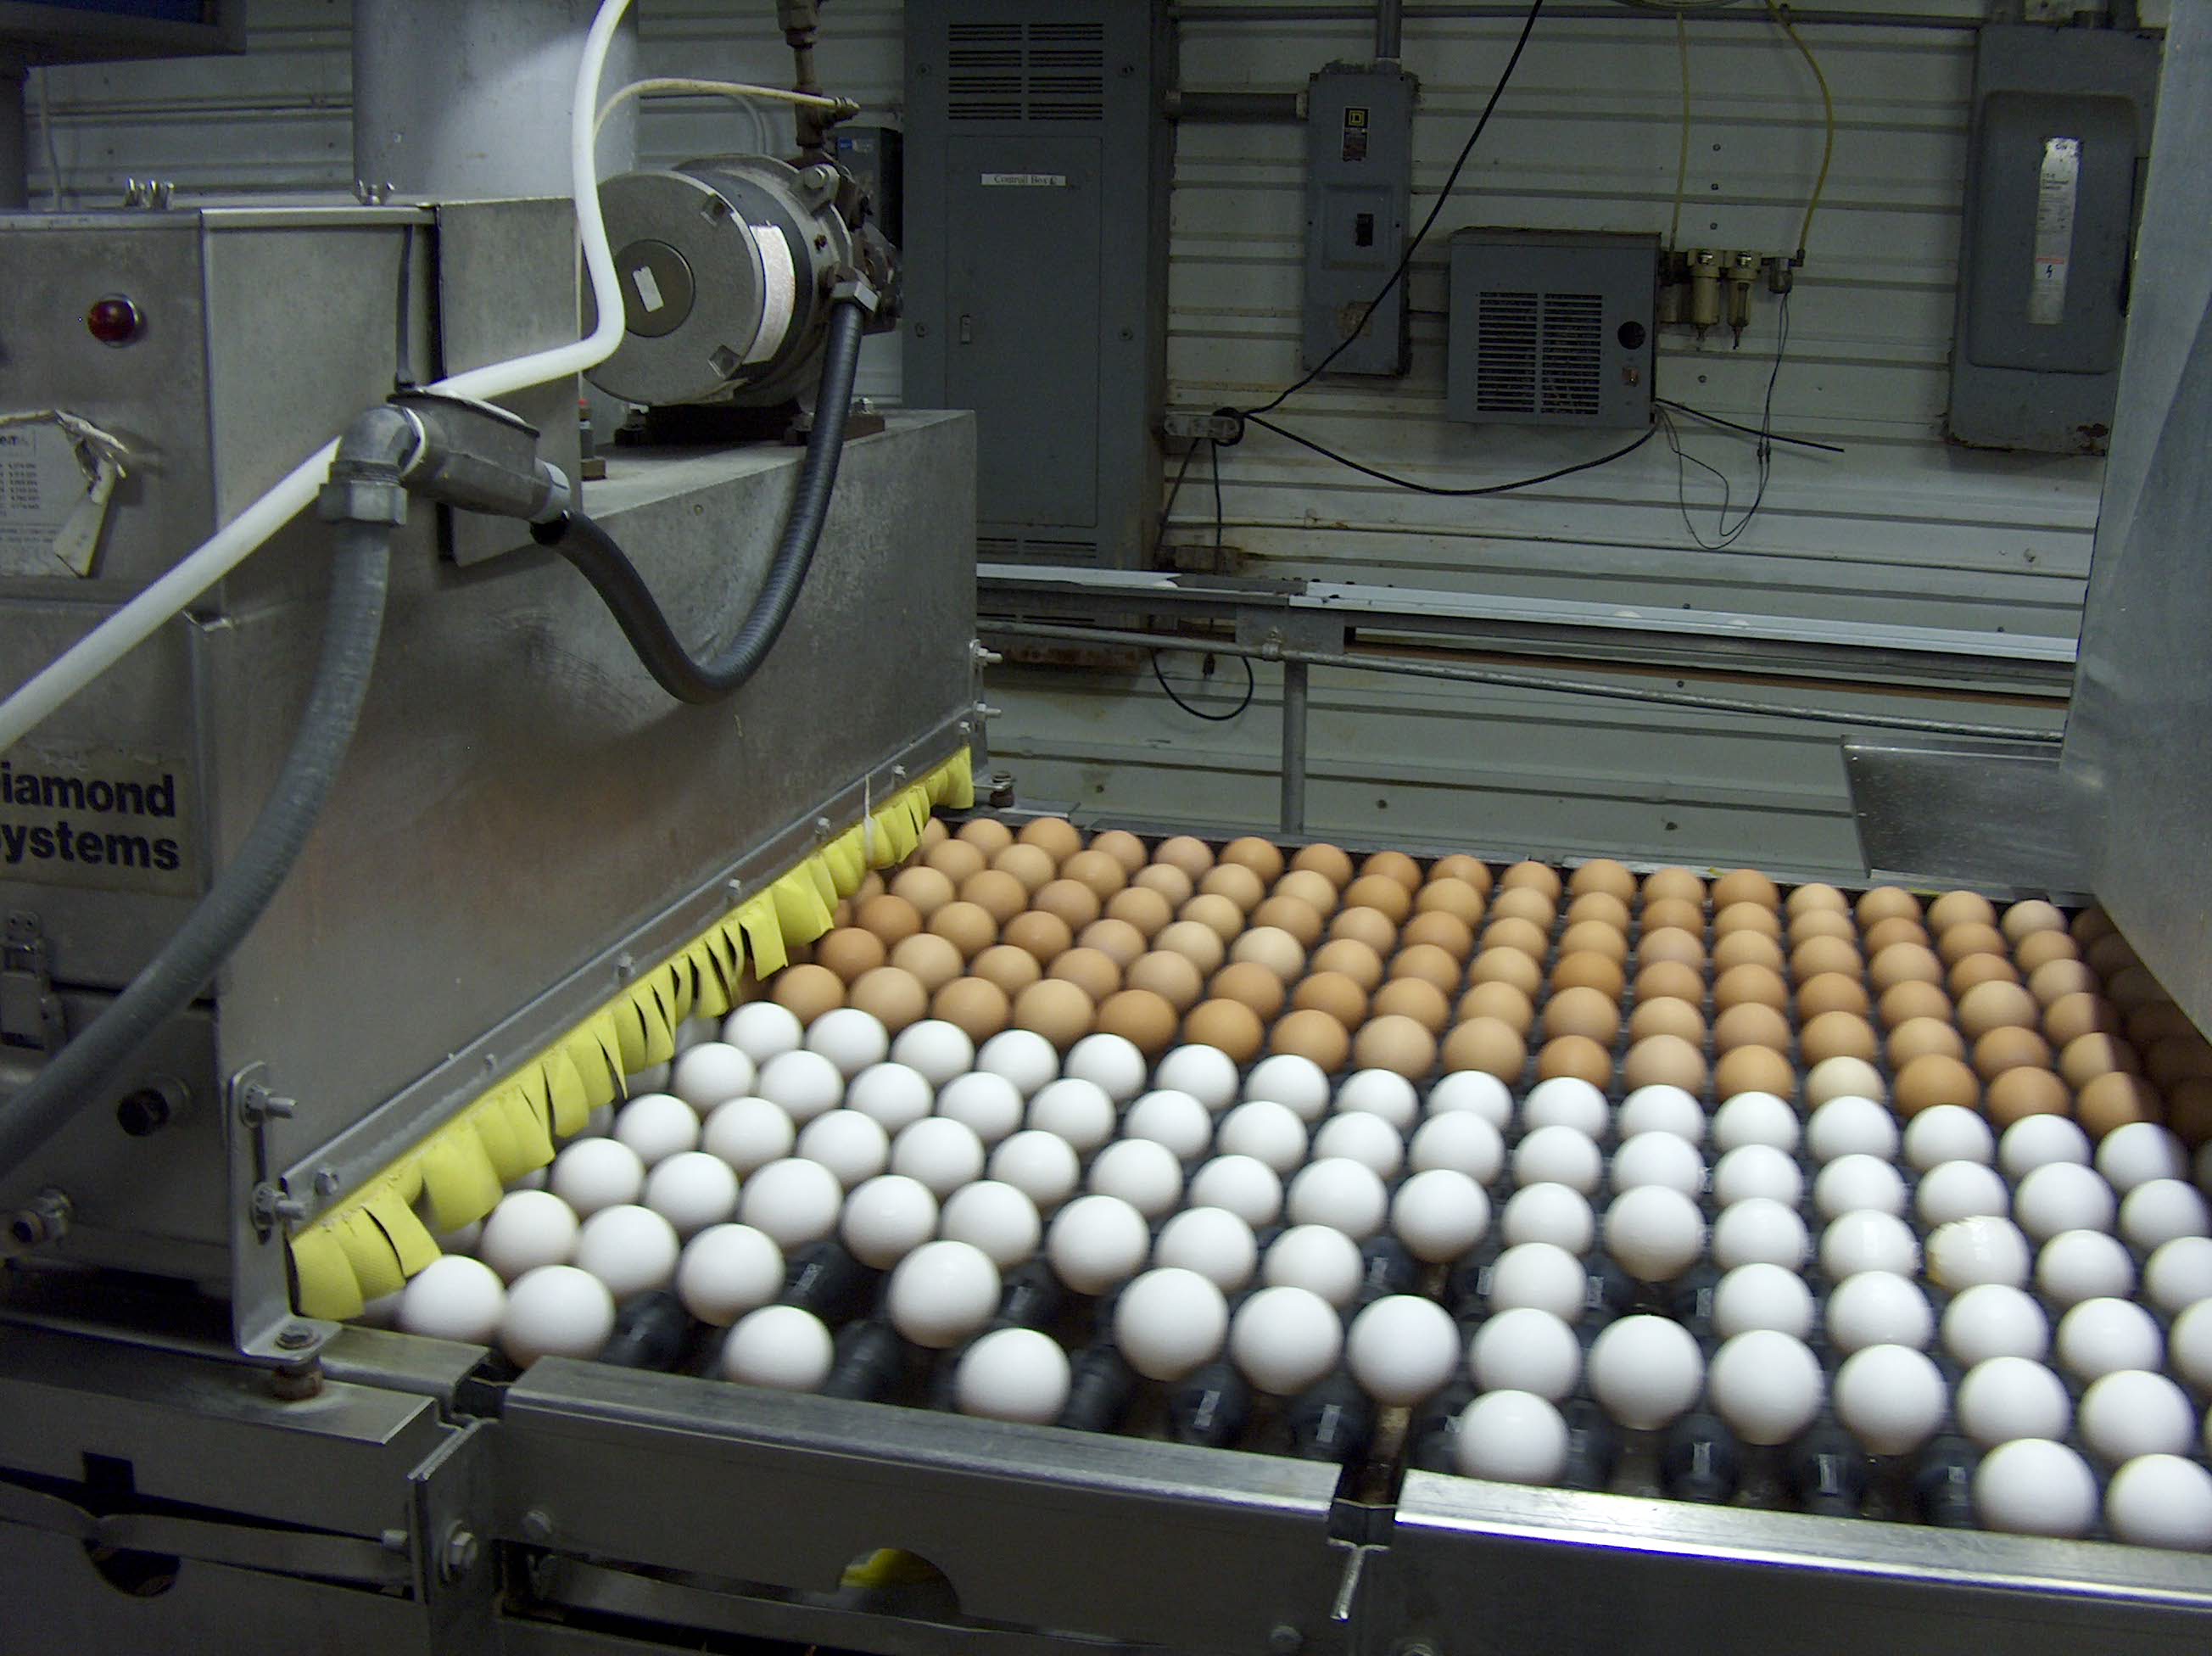 White and brown eggs on a production line.